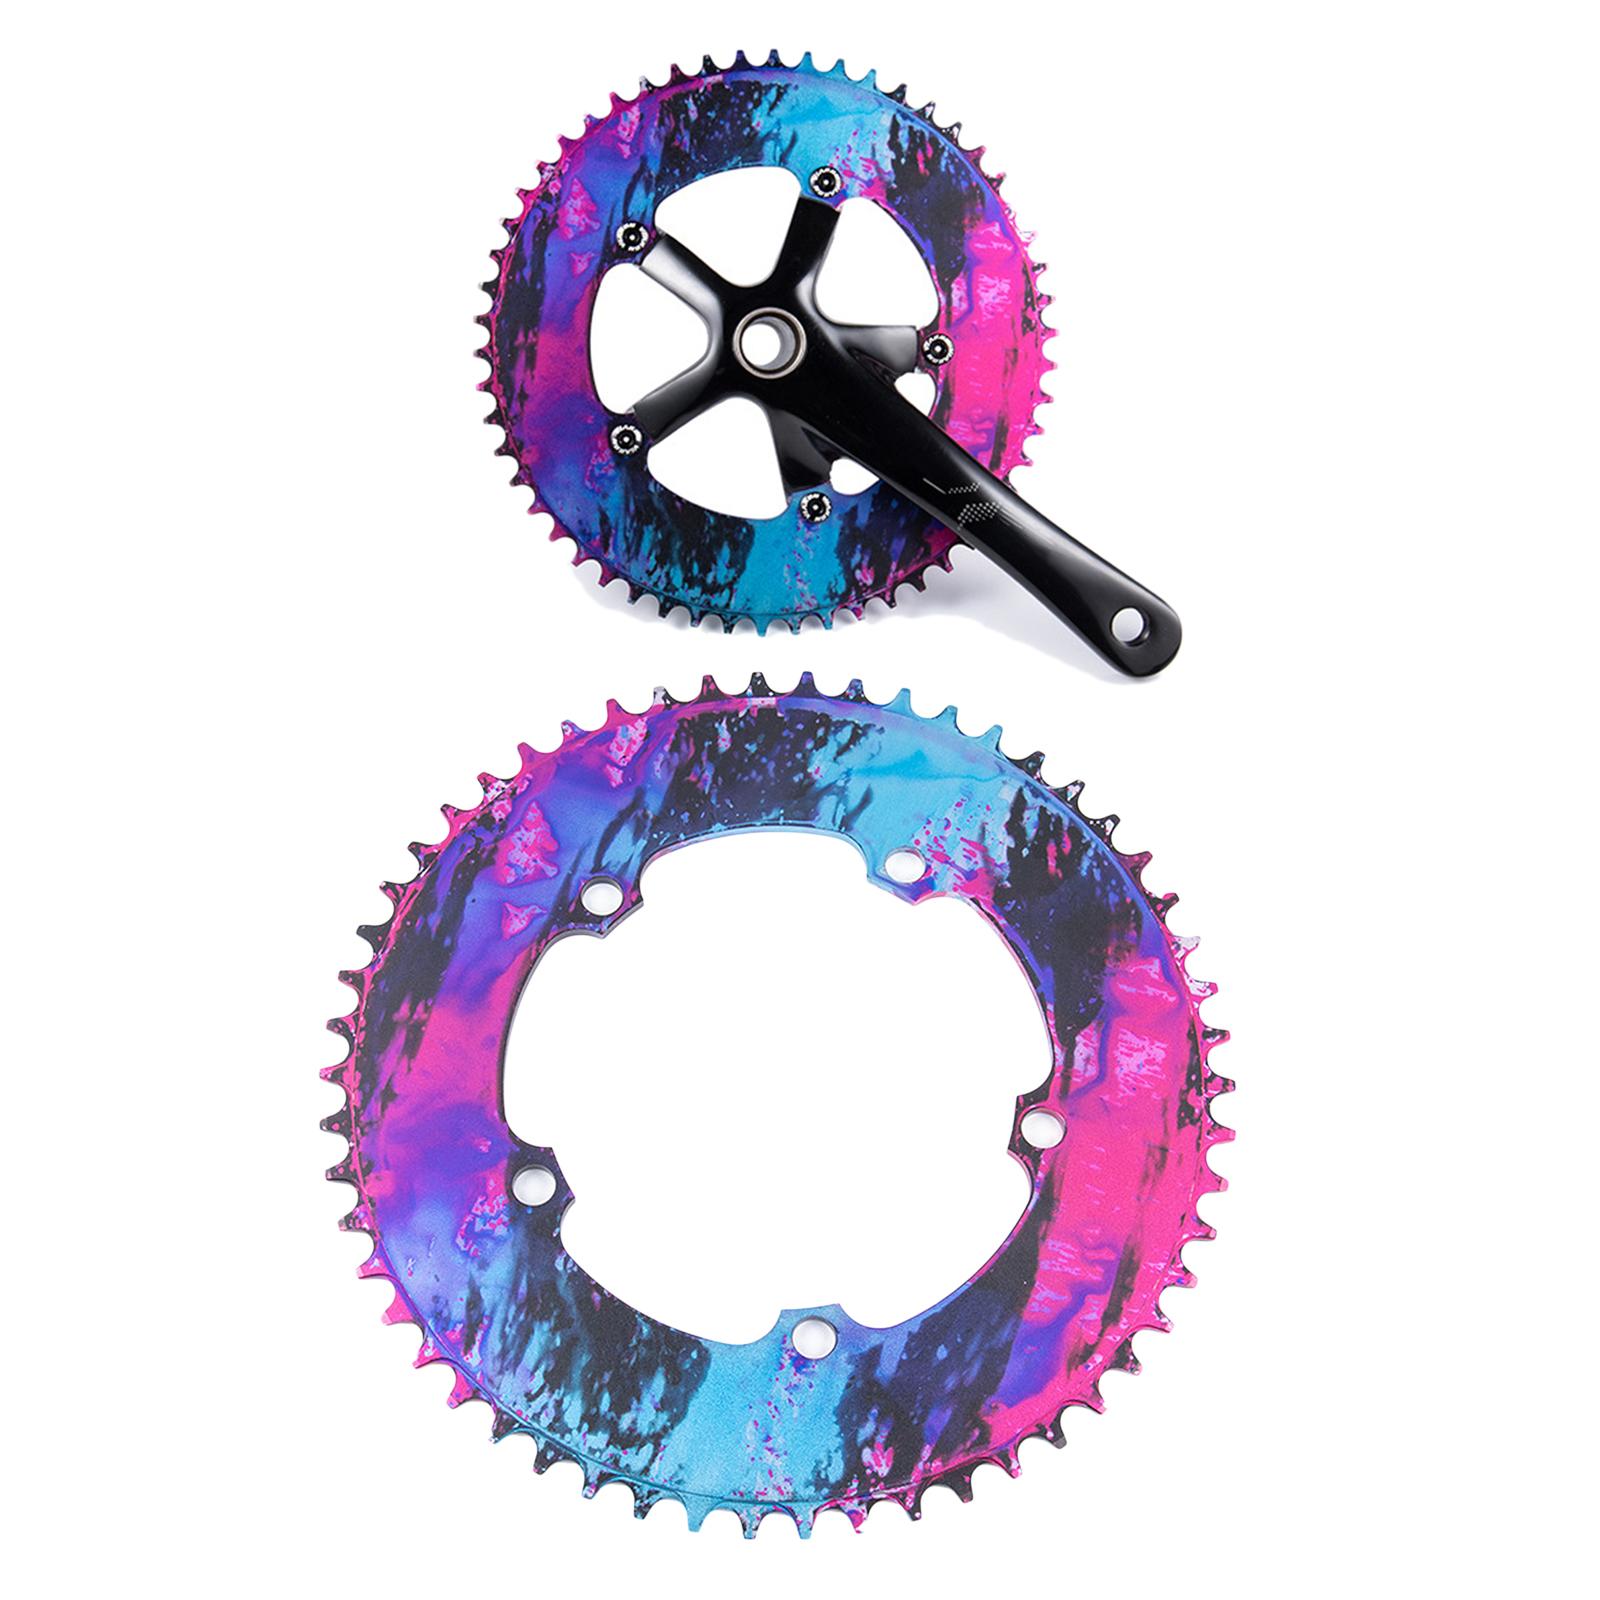 Deluxe Bike Chainring Solid Bicycle Narrow Wide BCD130 Chainwheel Fushia 56T